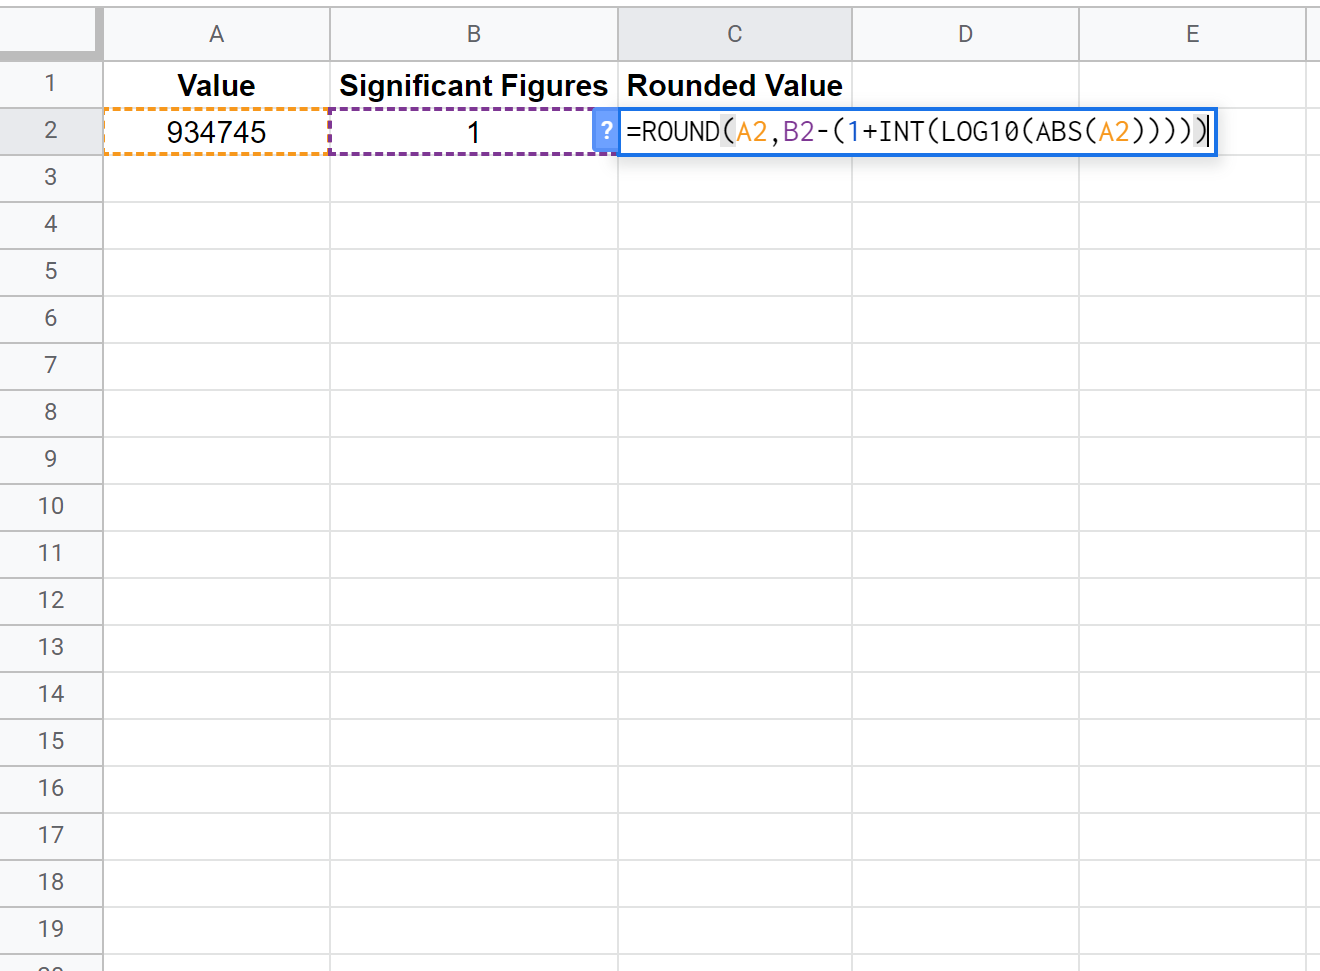 Significant figures in Google Sheets